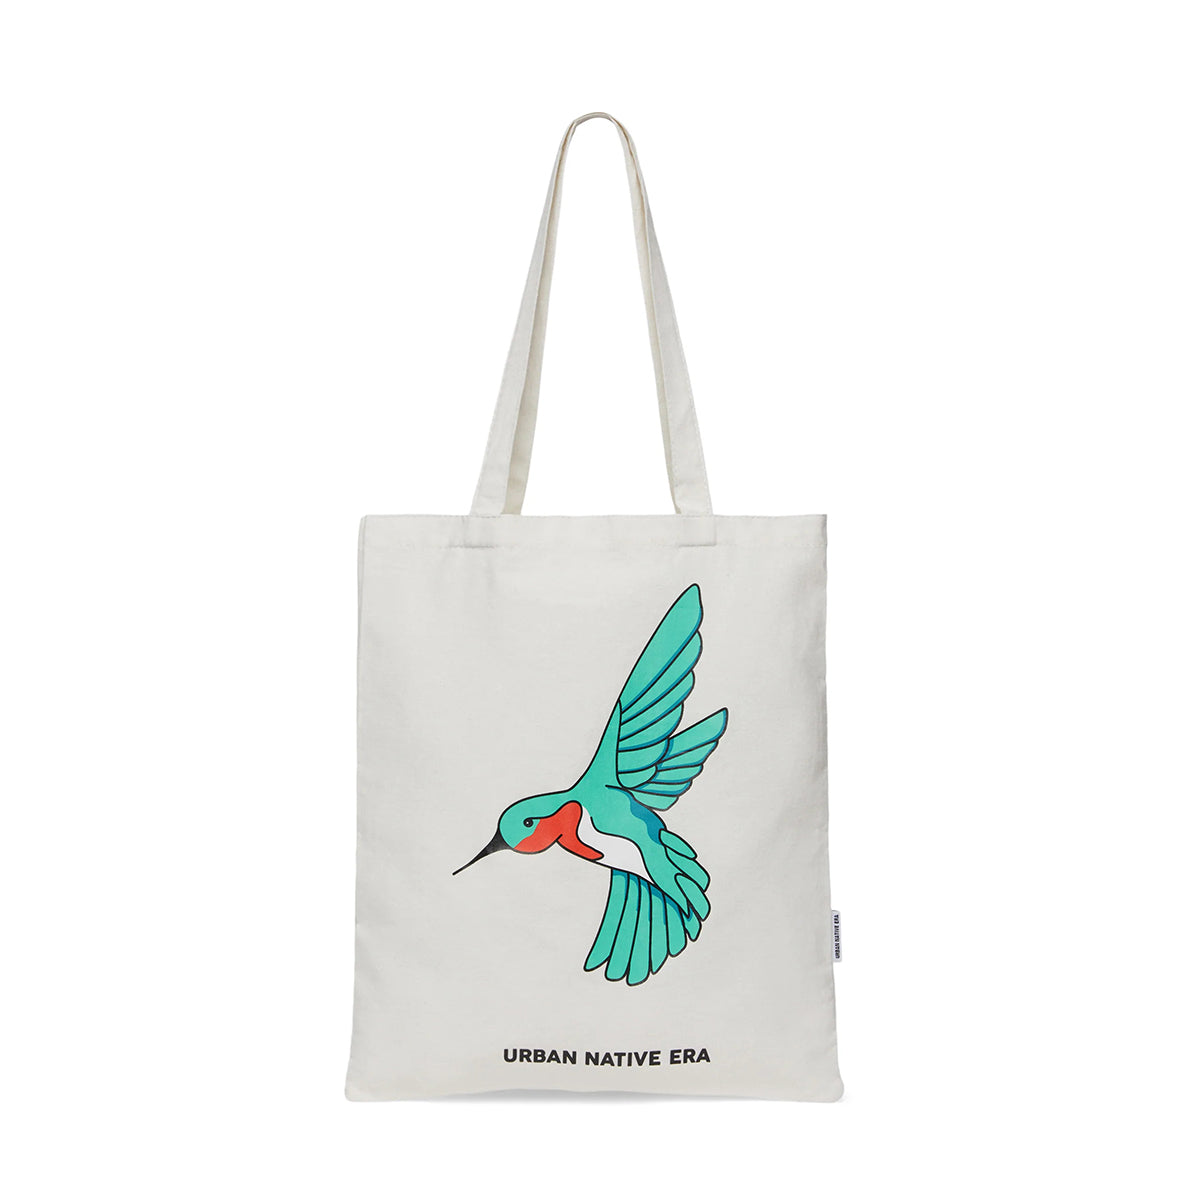 &quot;You Are On Native Land&quot; Recycled Tote Bag